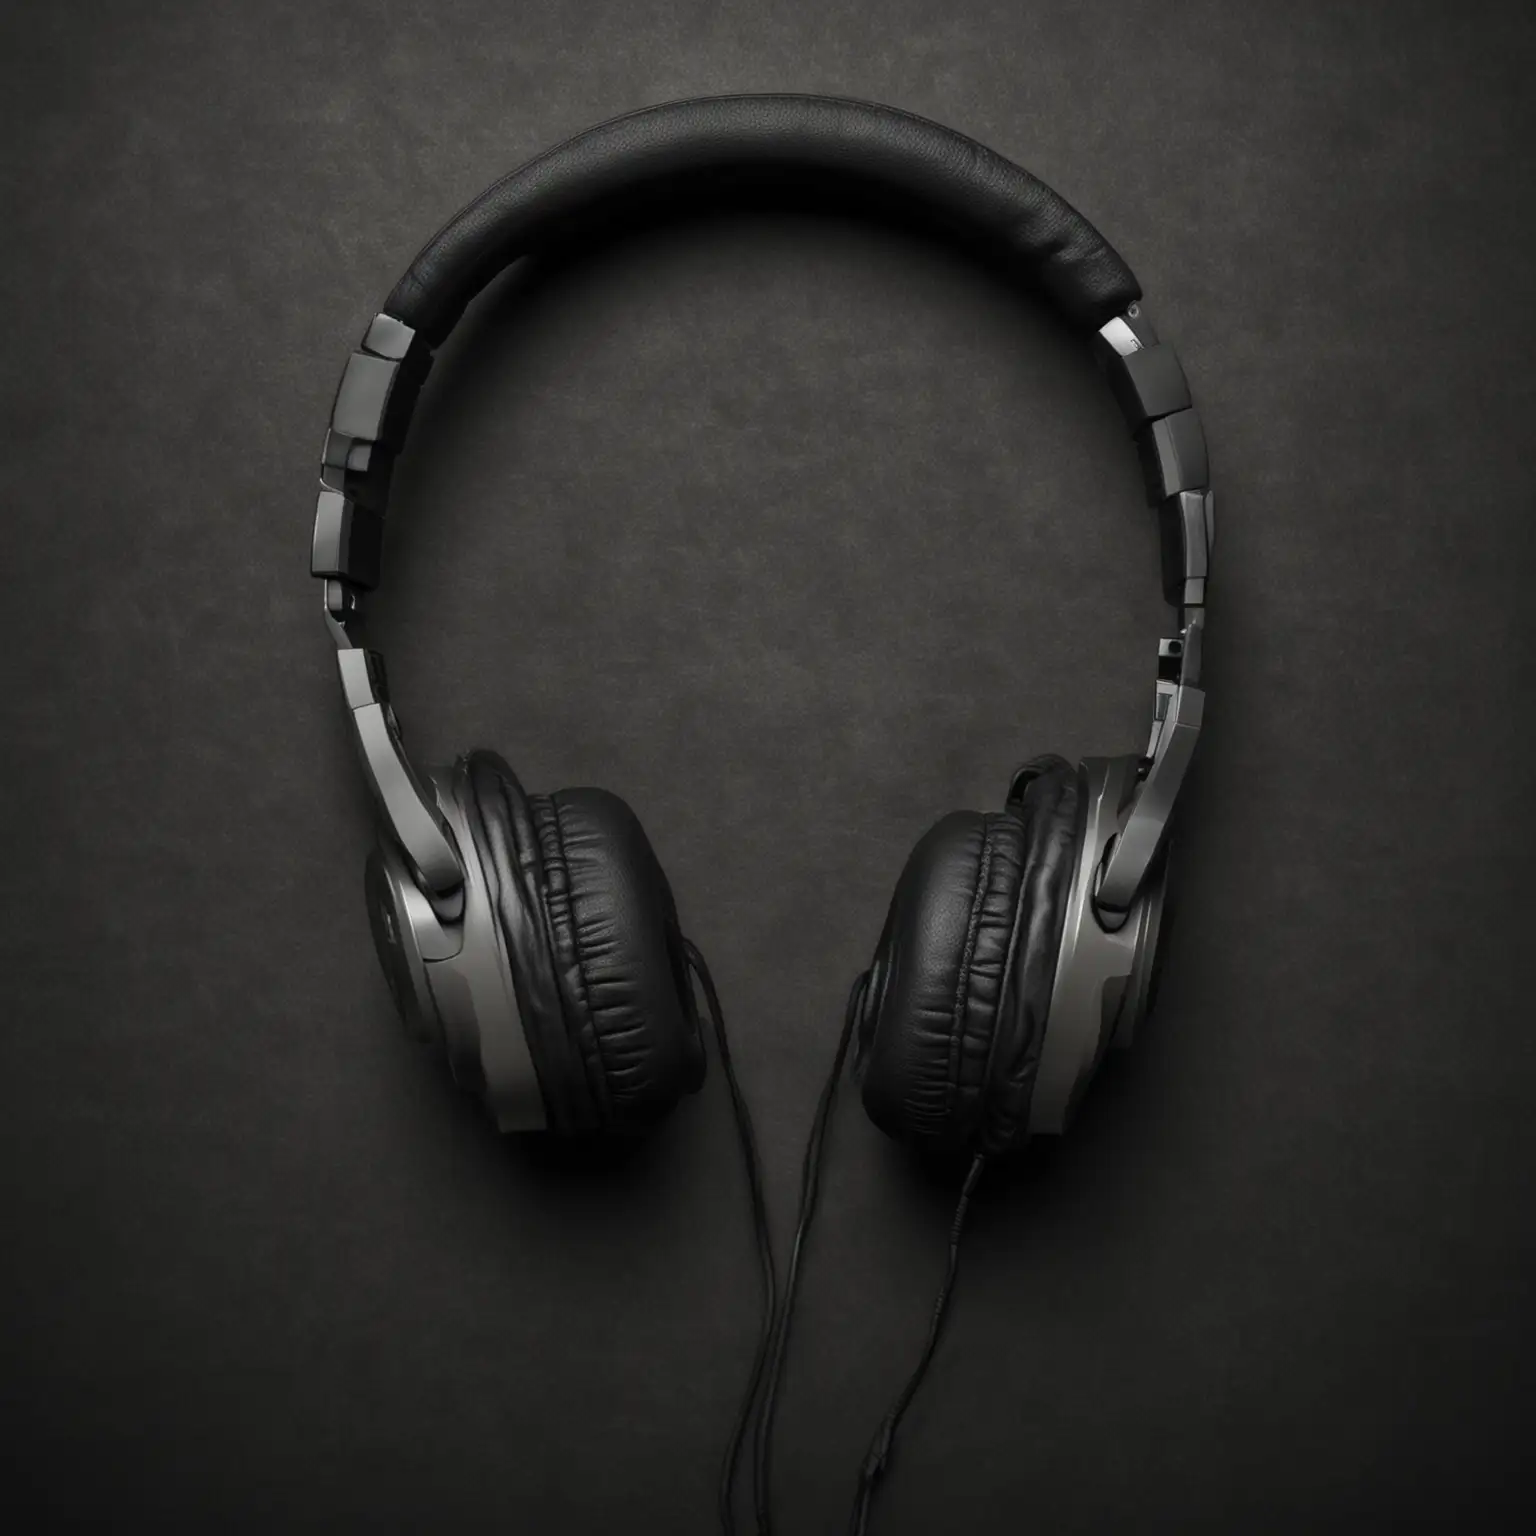 create a realistic image of a pair of headphones, on a dark background